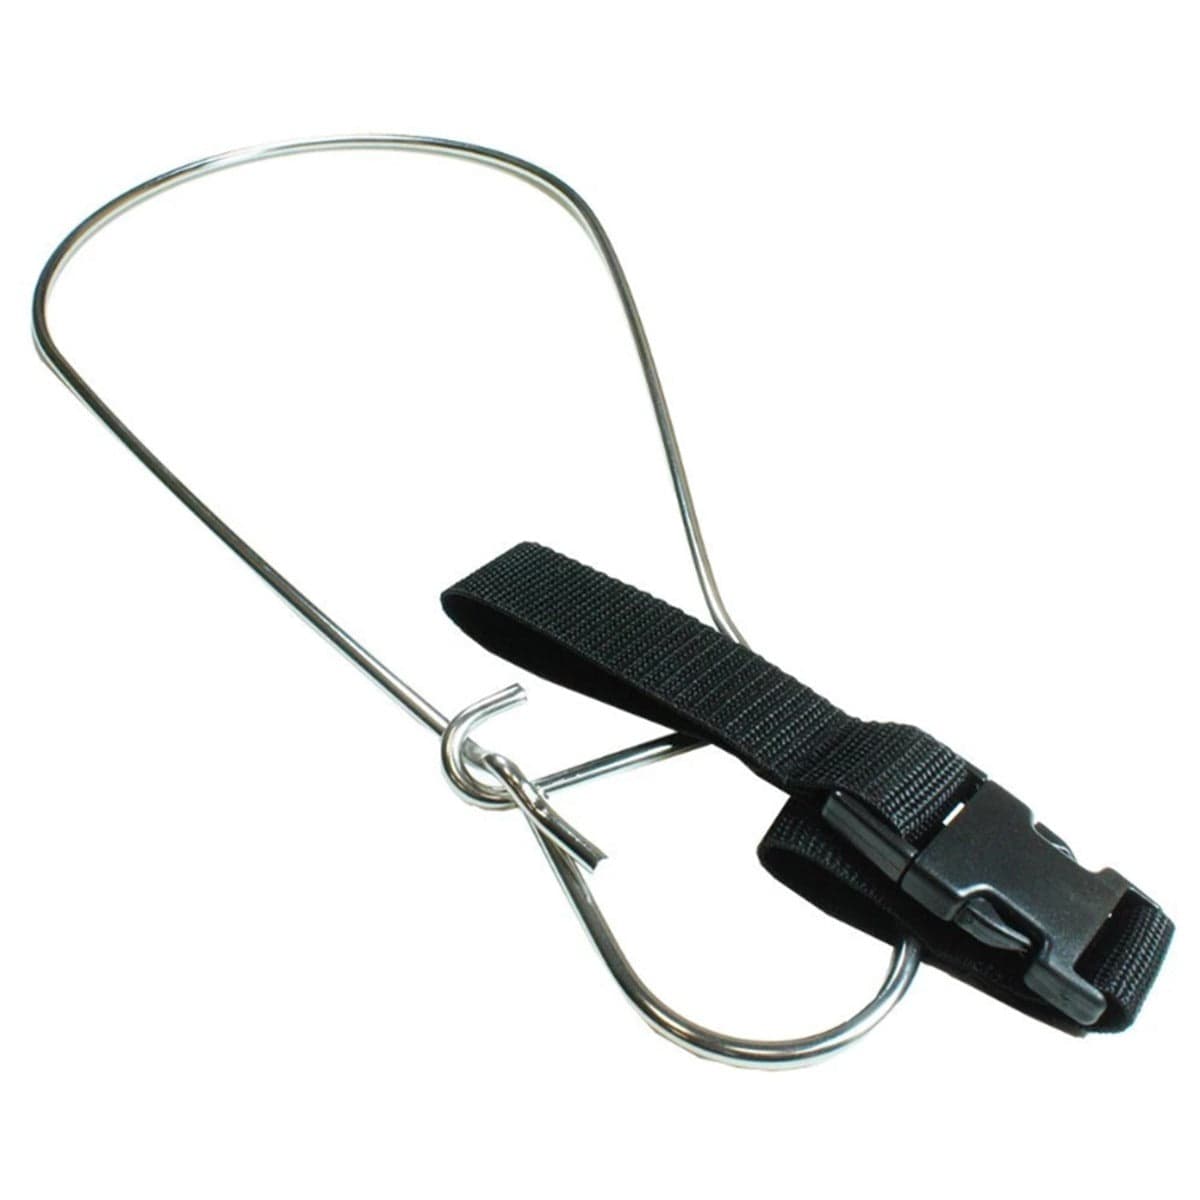 Trident STANDARD FISH CLIP WITH QUICK RELEASE - Trident STANDARD FISH CLIP WITH QUICK RELEASE - 1